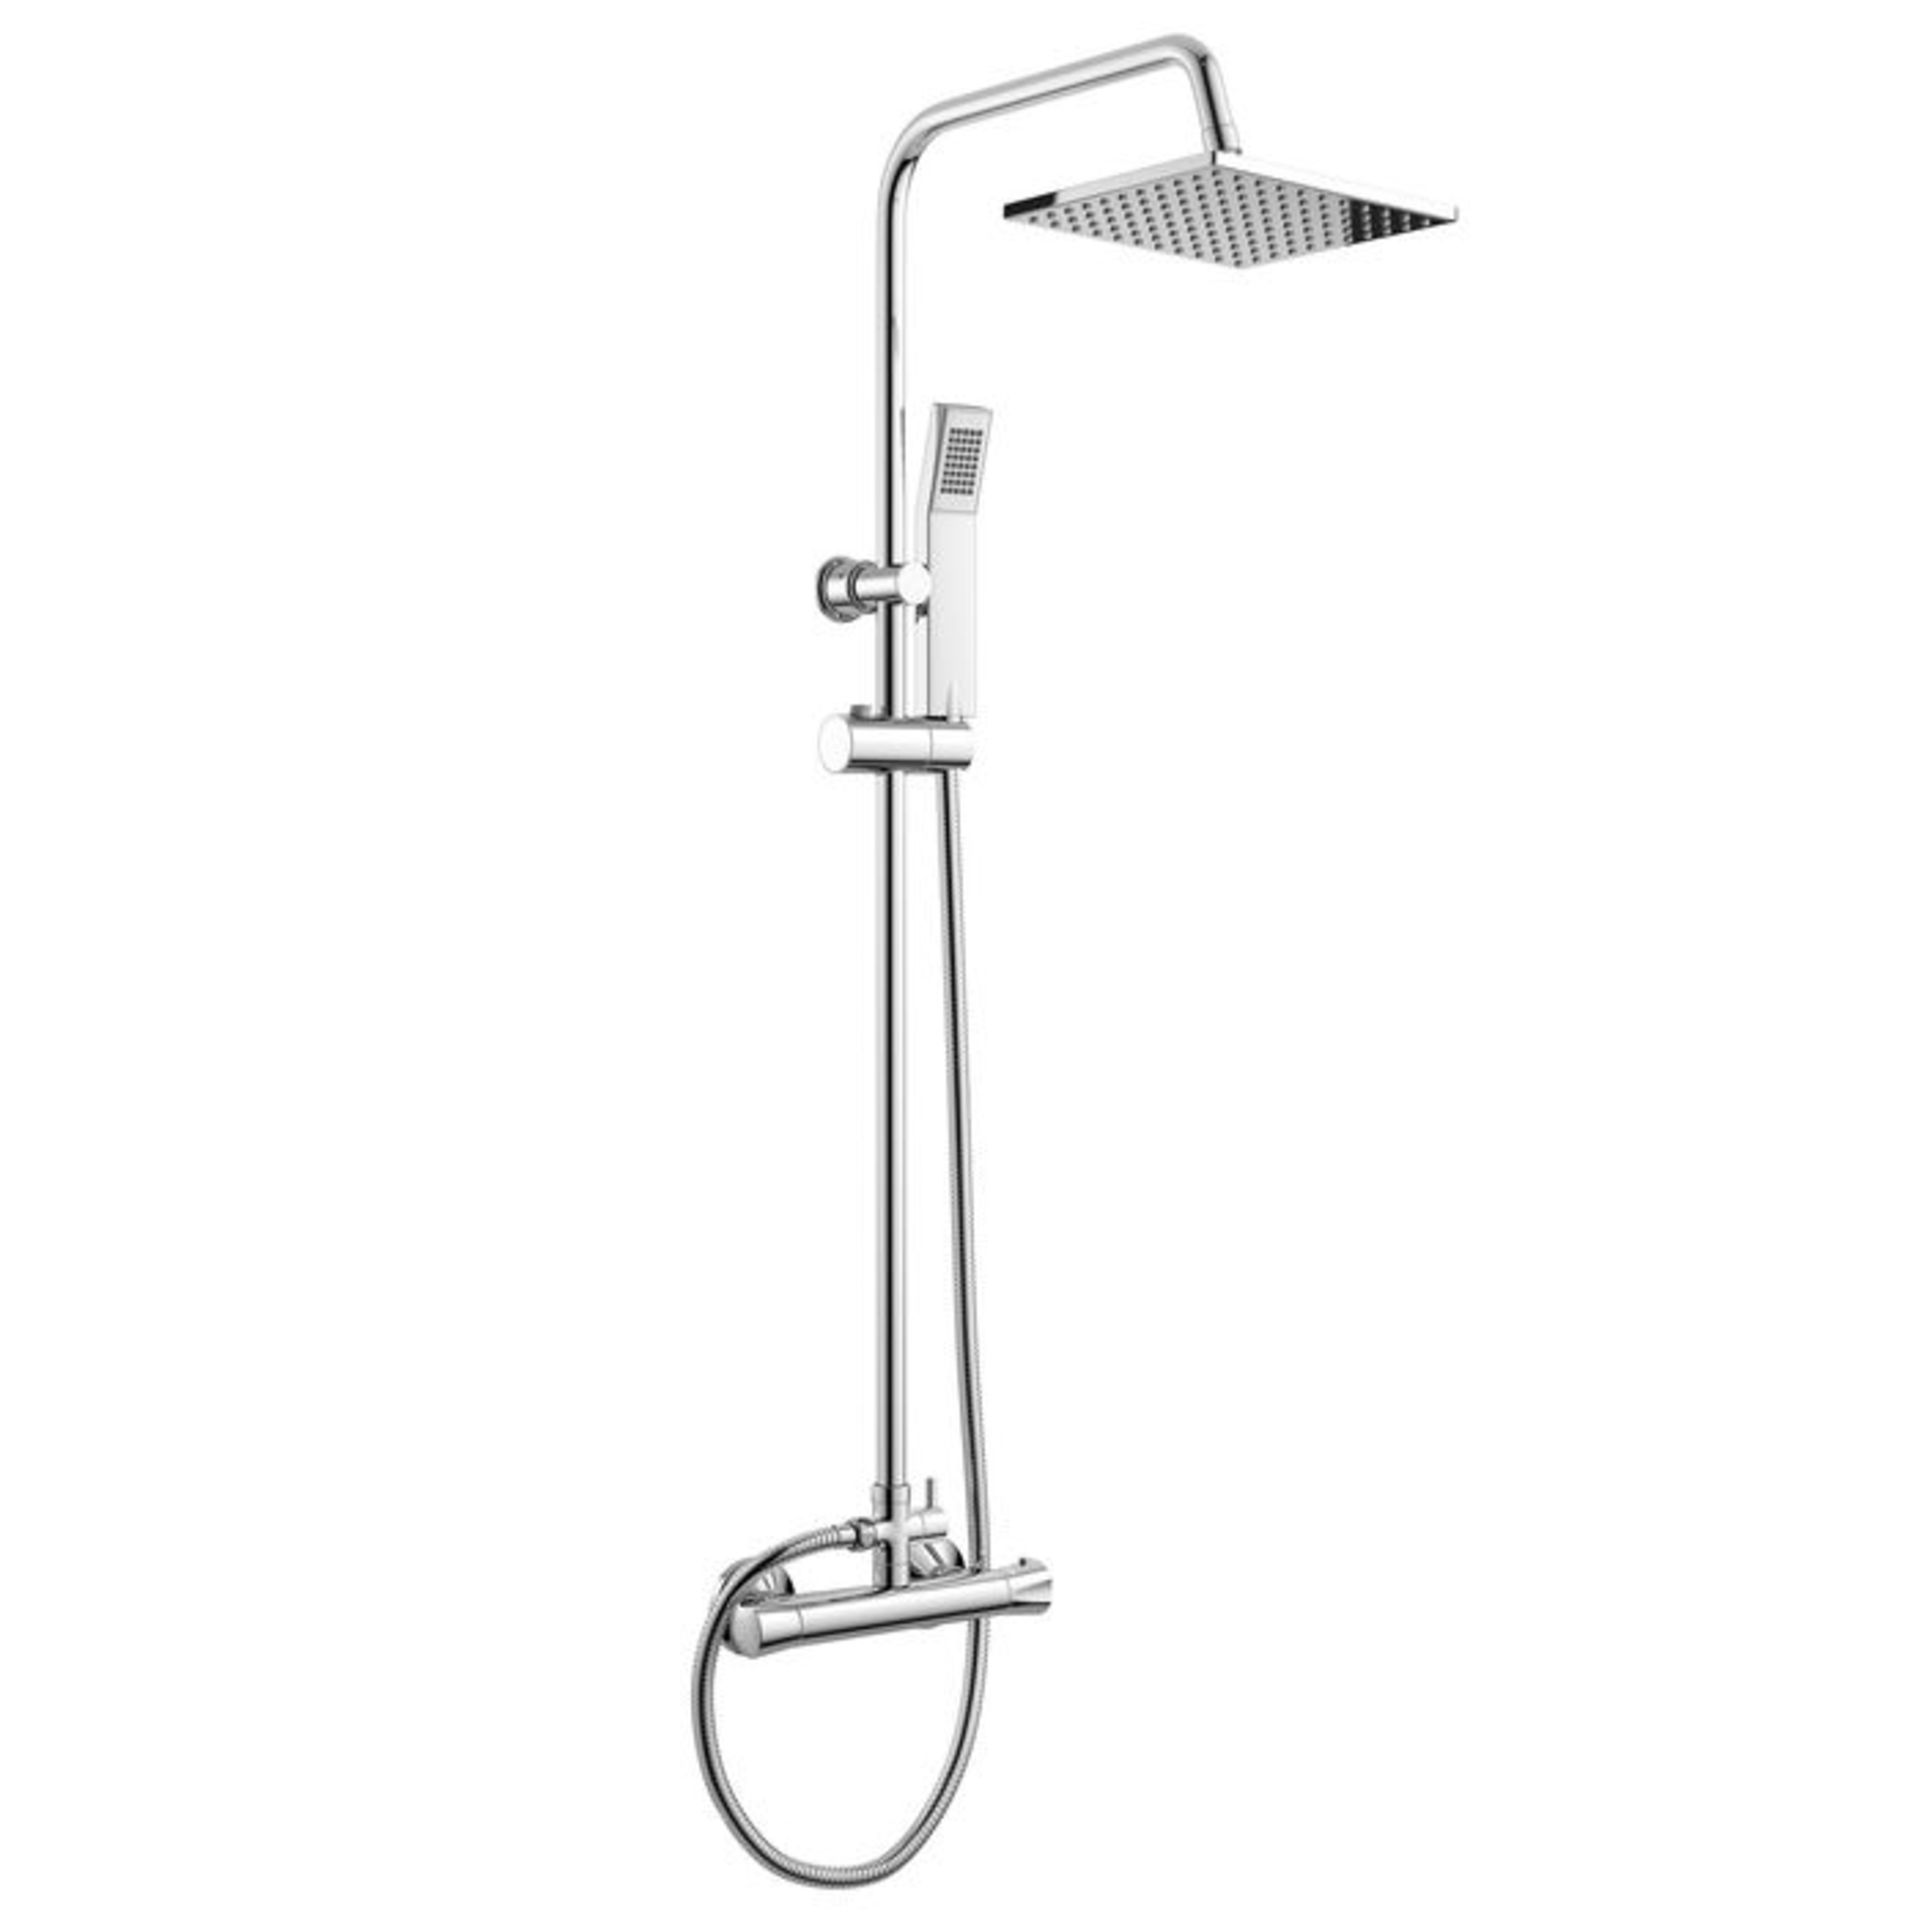 (P159) Square Exposed Thermostatic Shower Kit & Medium Head. Curved features and contemporary - Image 2 of 3